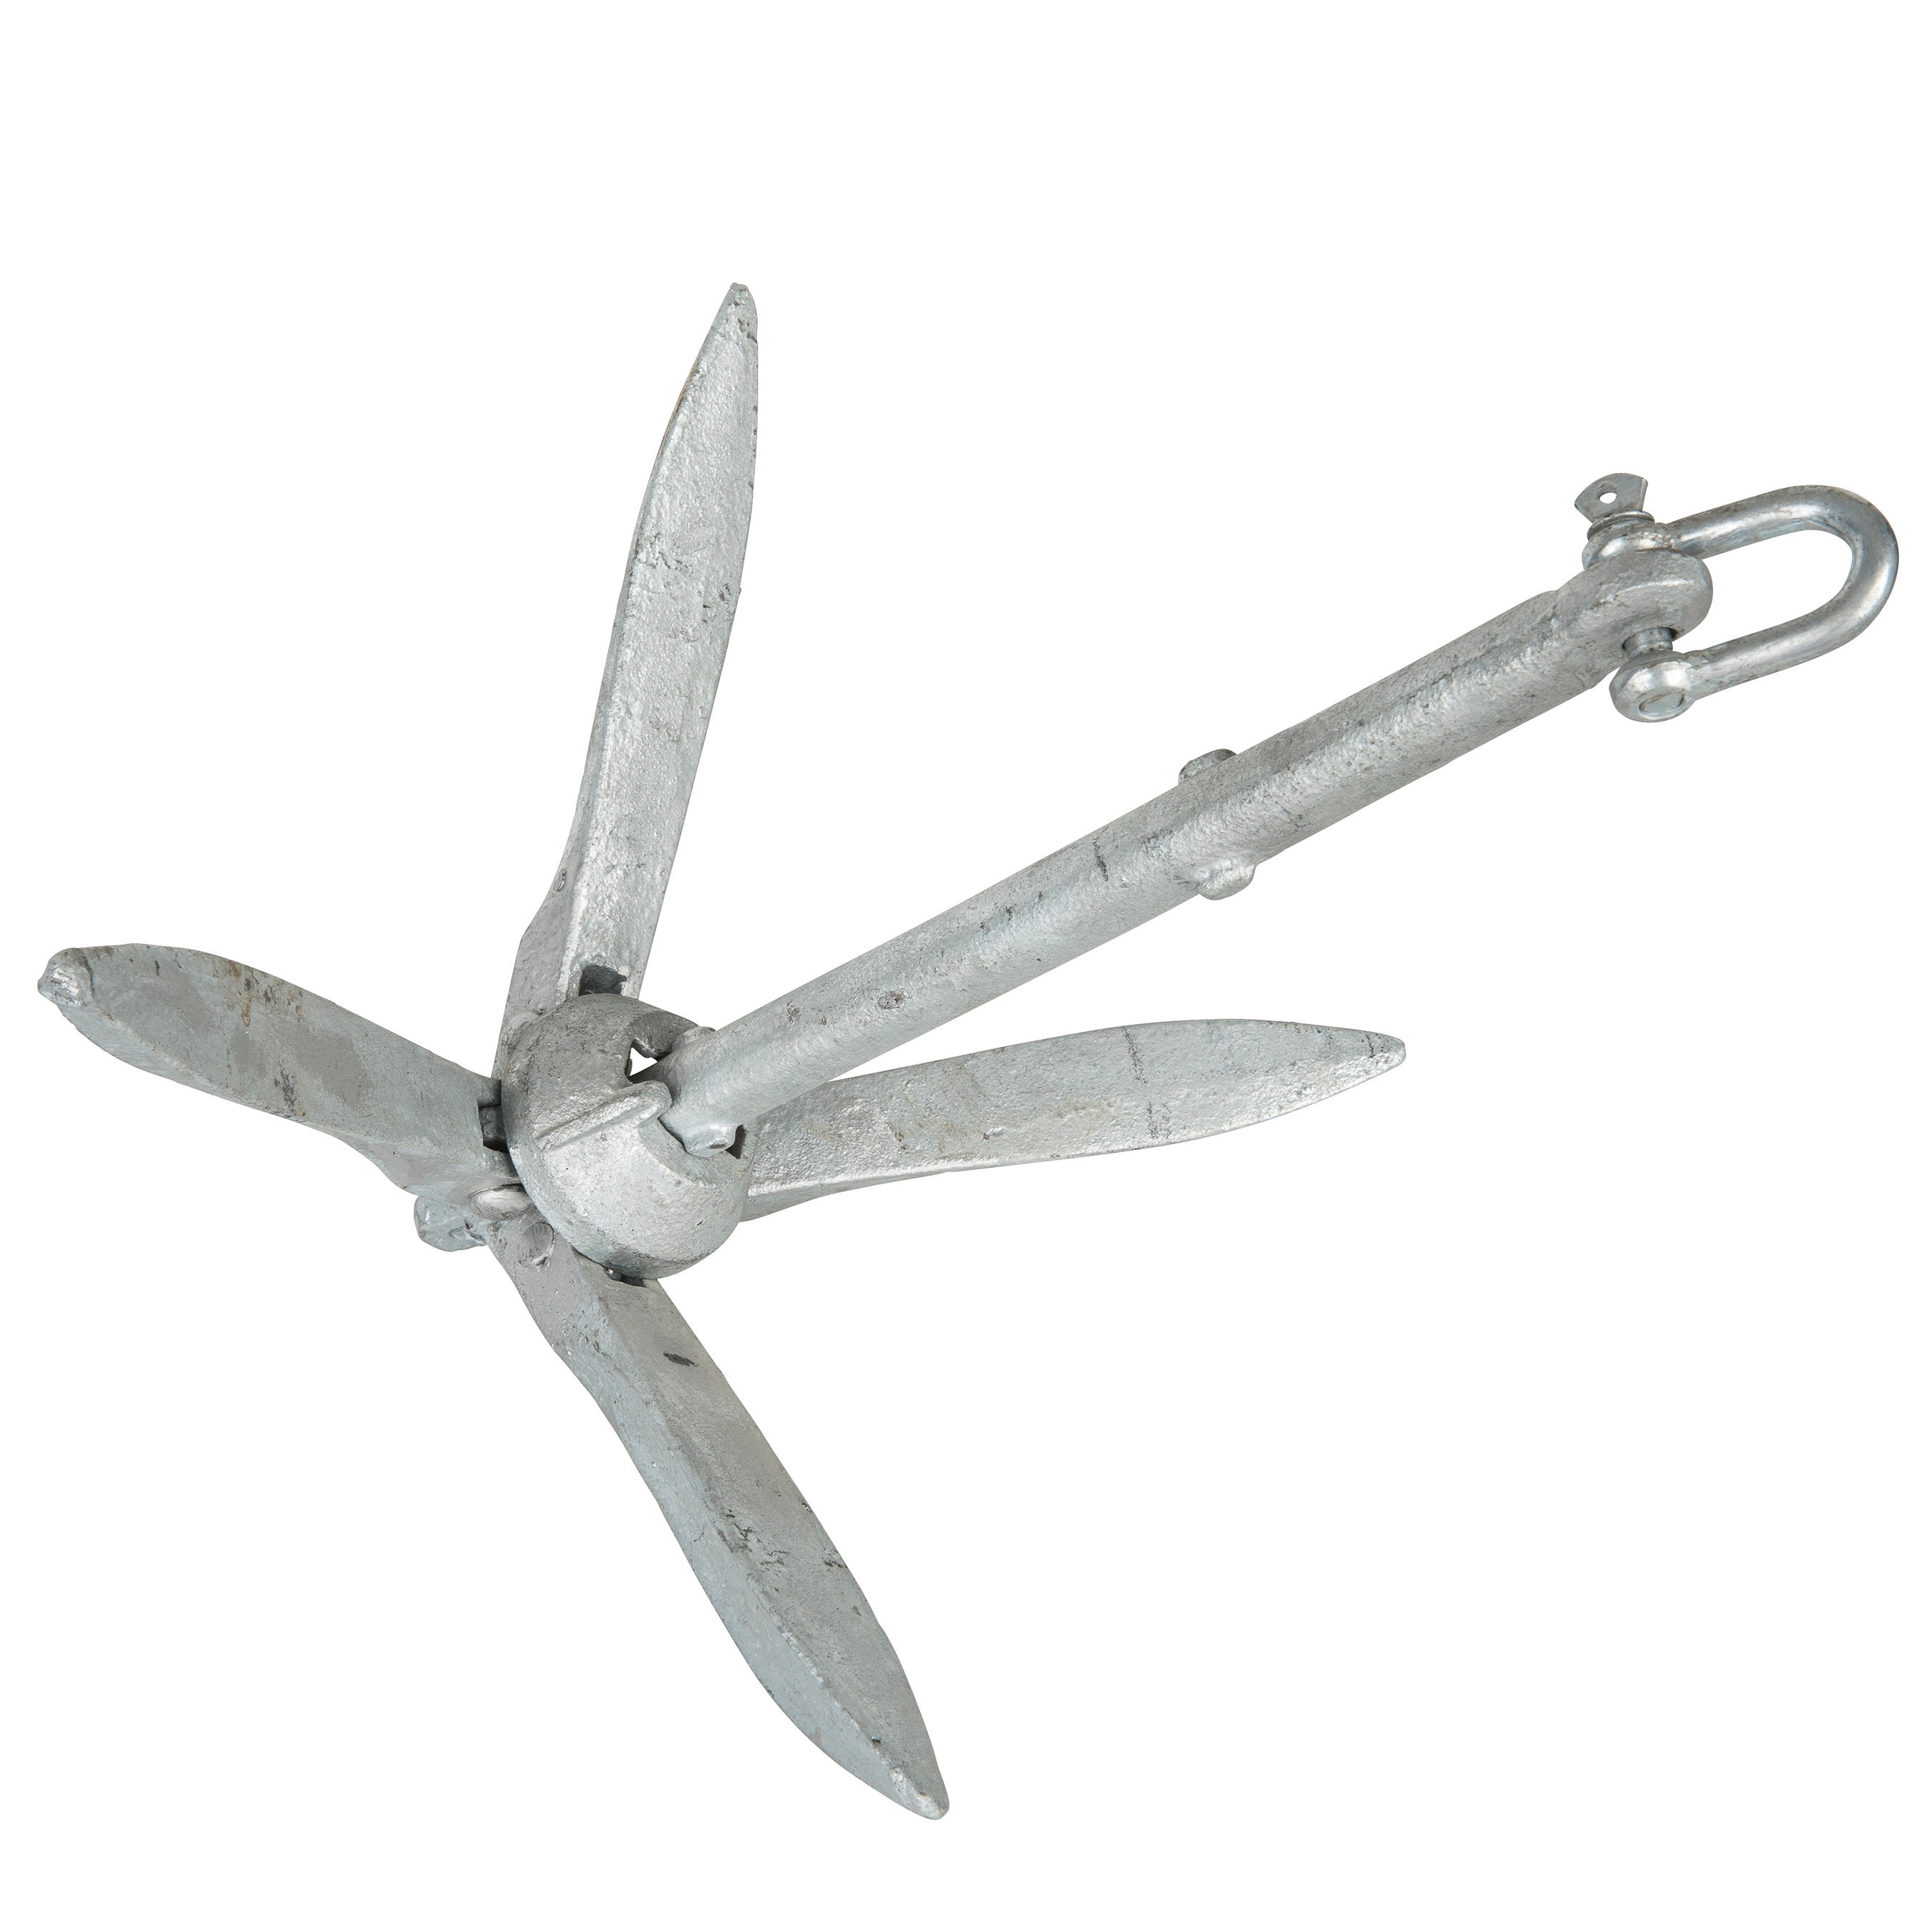 PLASTIMO Grapnel Anchor for Small Boats and Kayaks 2.3 kg